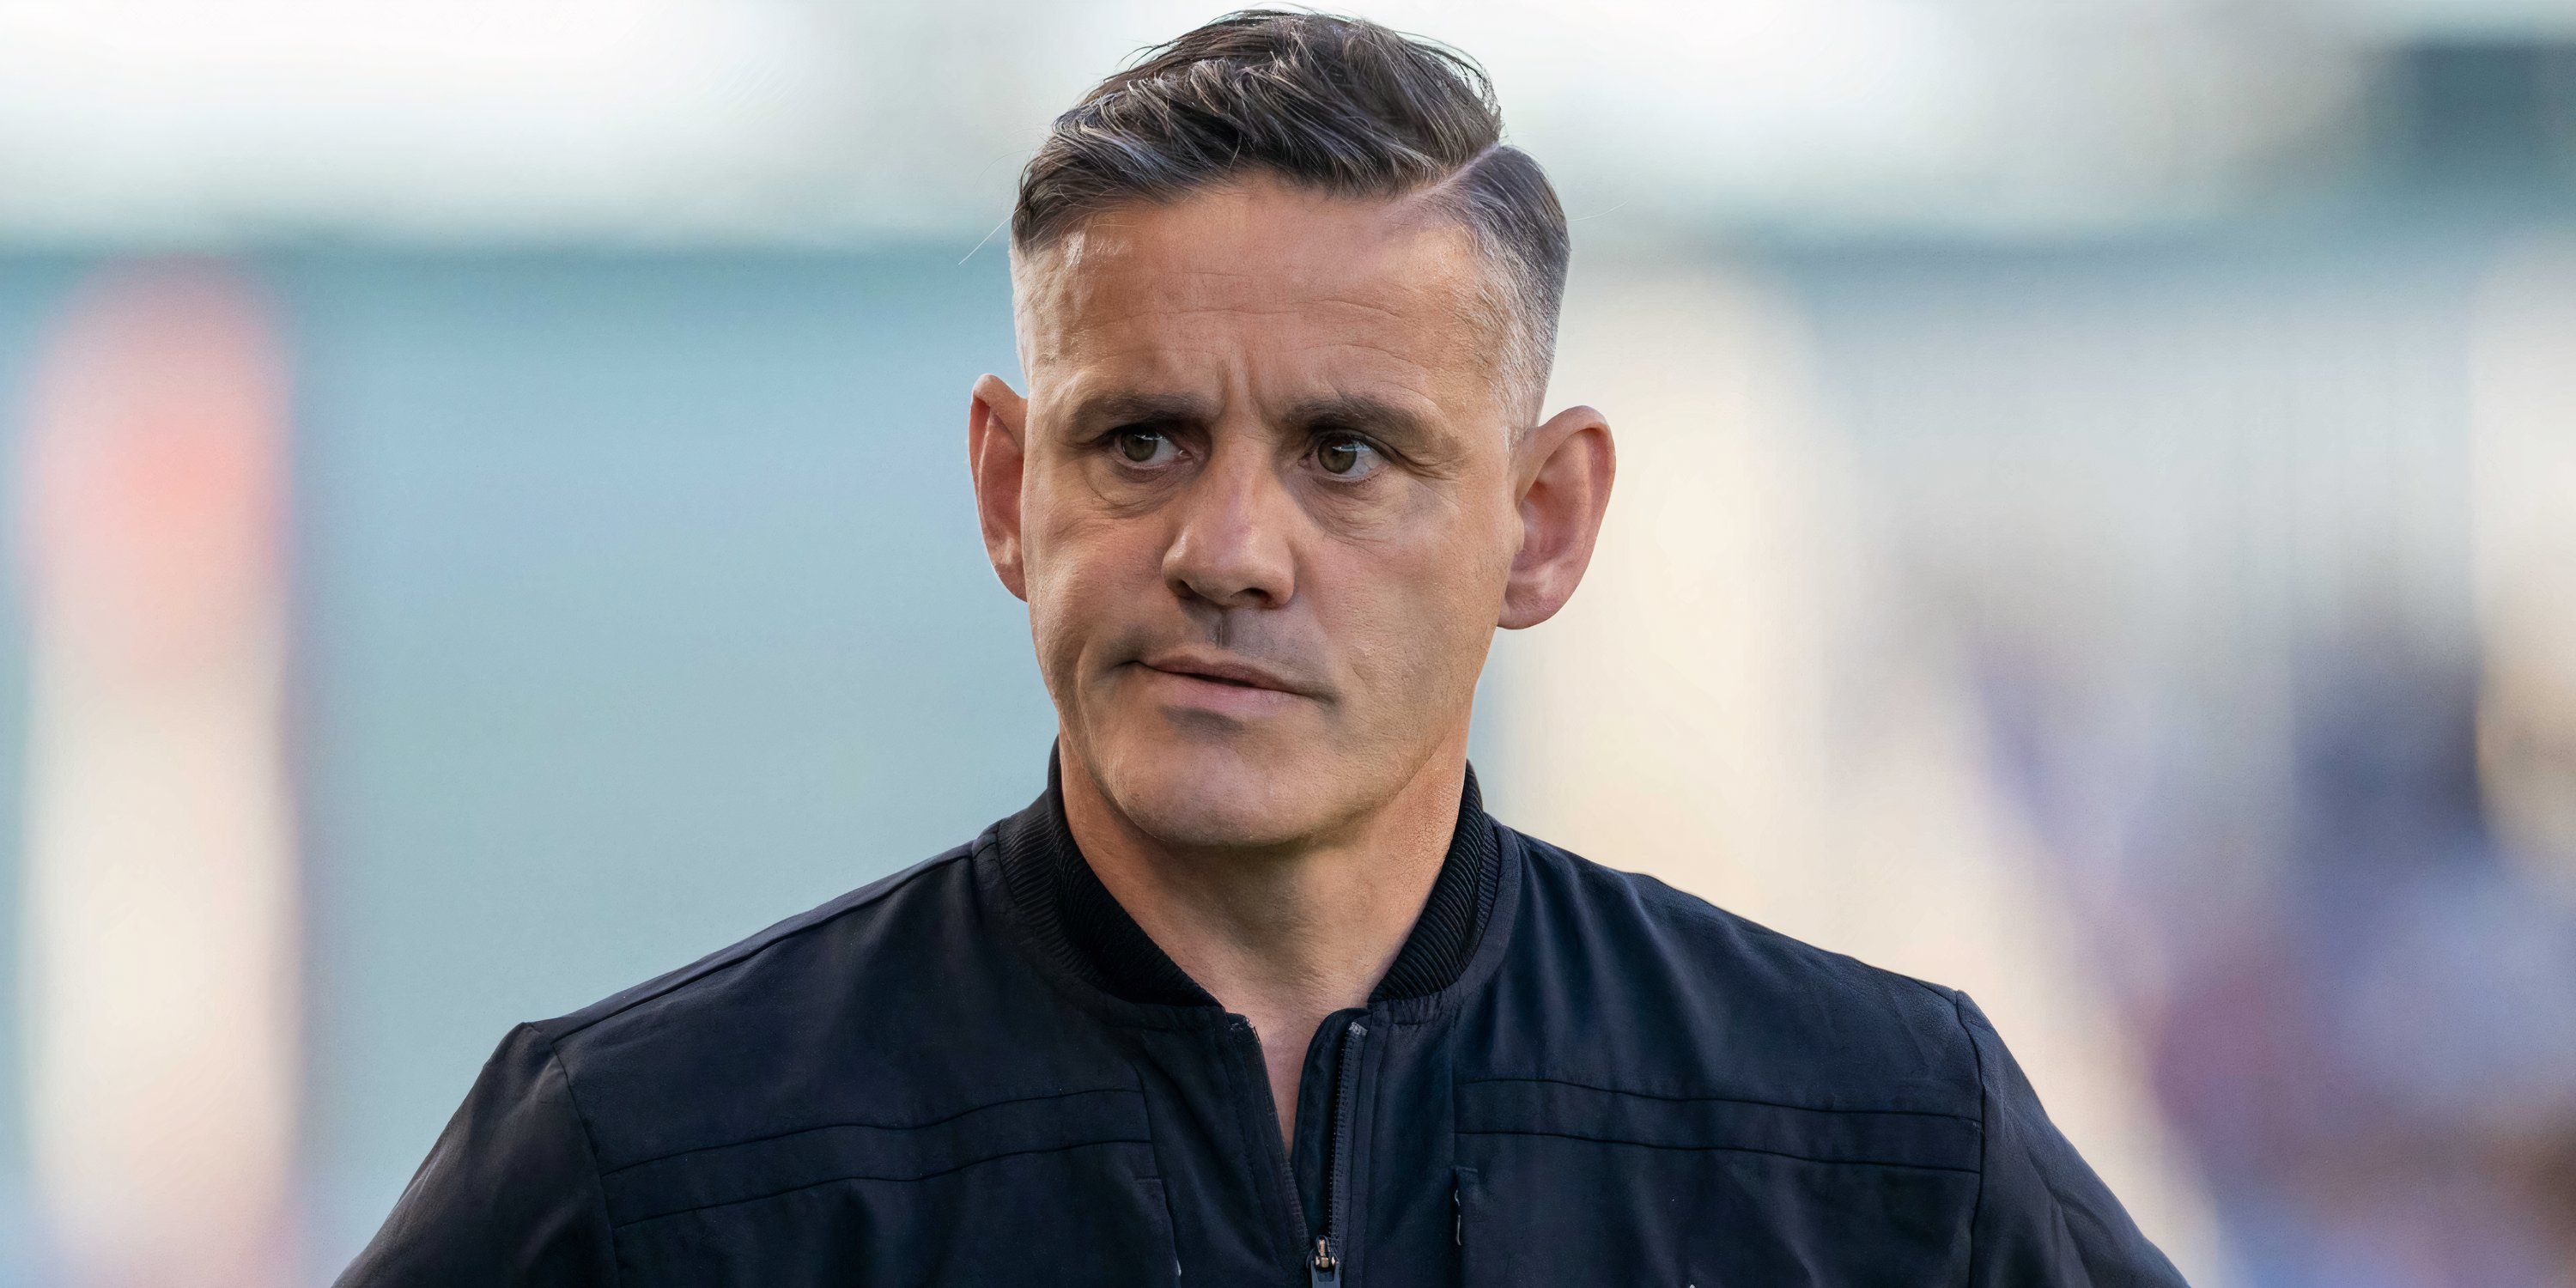 Sources say John Herdman was aware of drone use to spy on Canada opponents